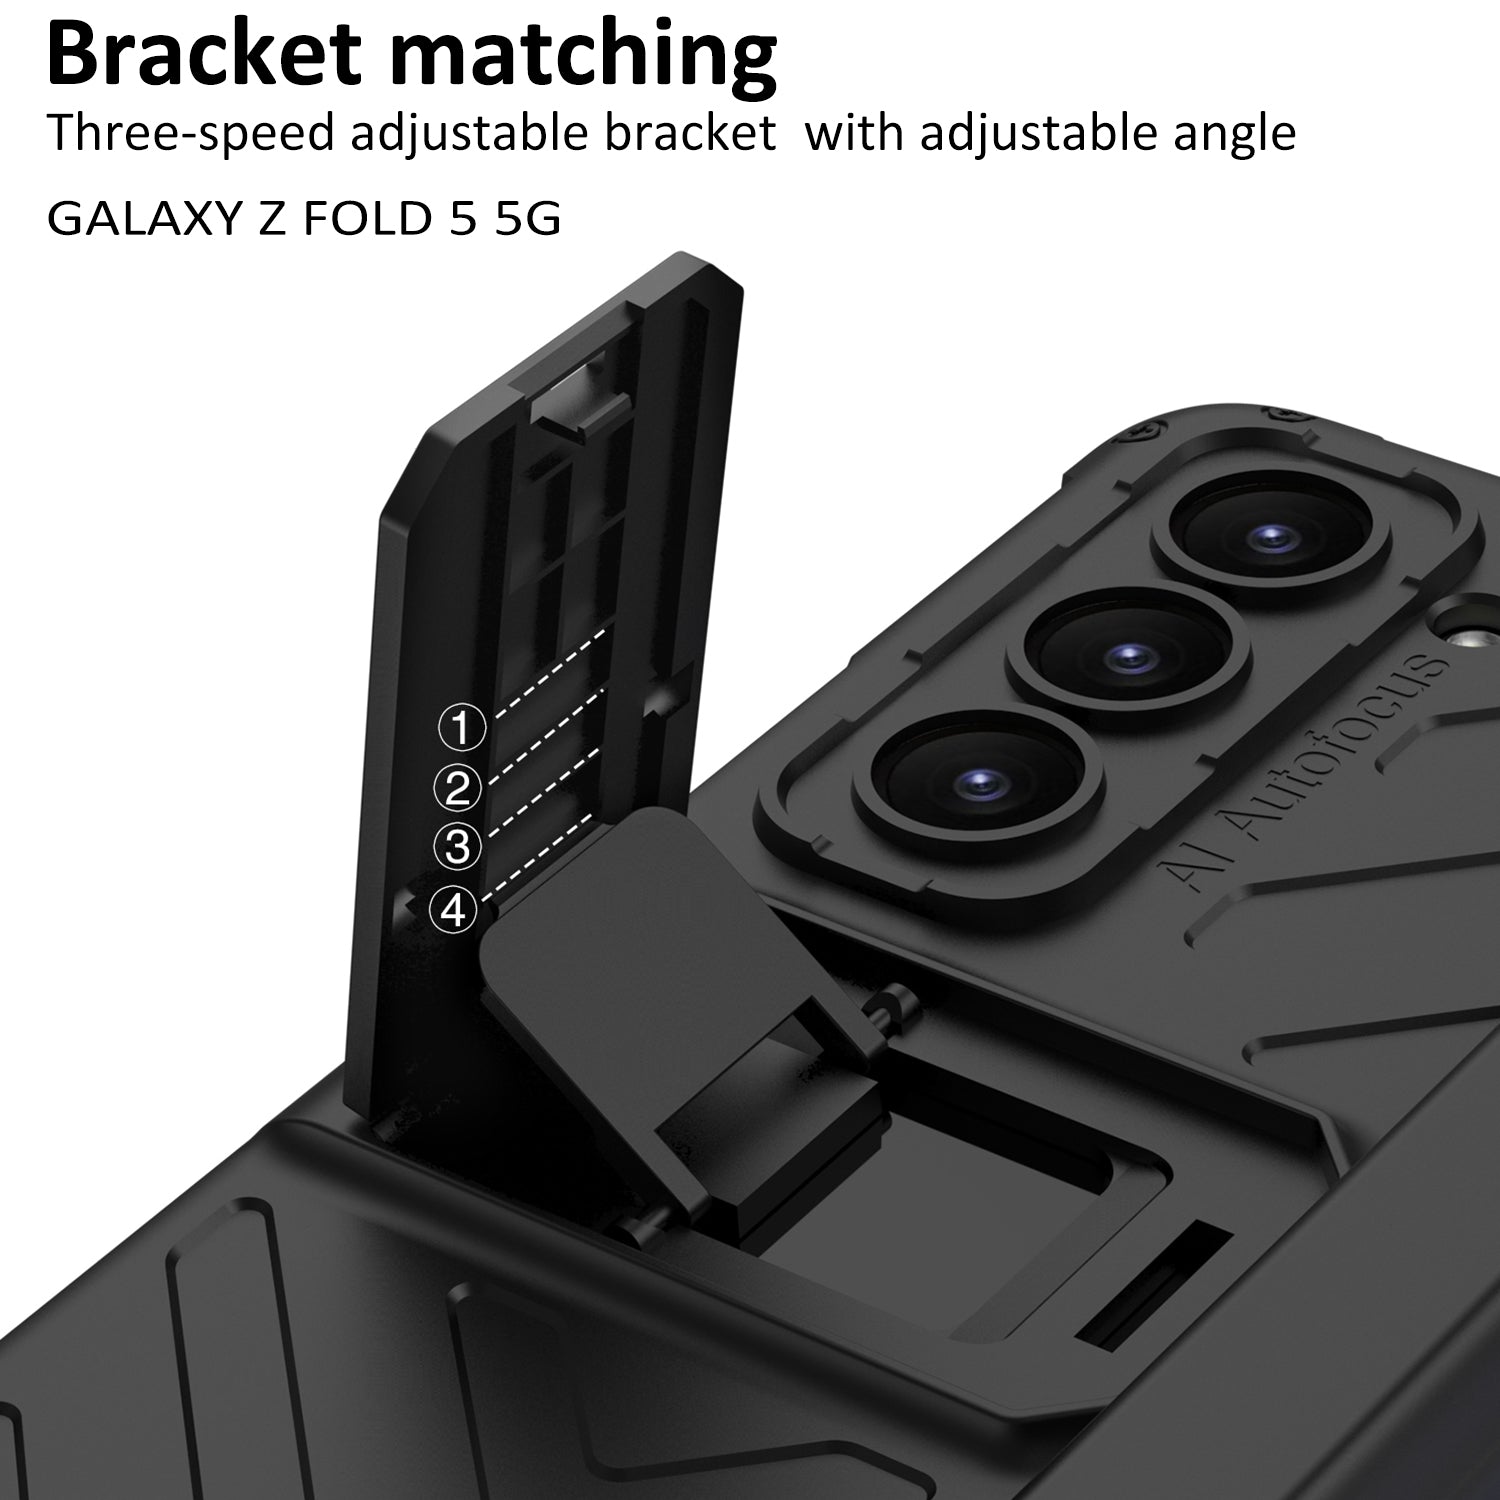 Magnetic Armor All-included Slide Pen Case With Back Screen Glass Hinge Holder Phone Cover For Samsung Galaxy Z Fold3 Fold4 Fold5